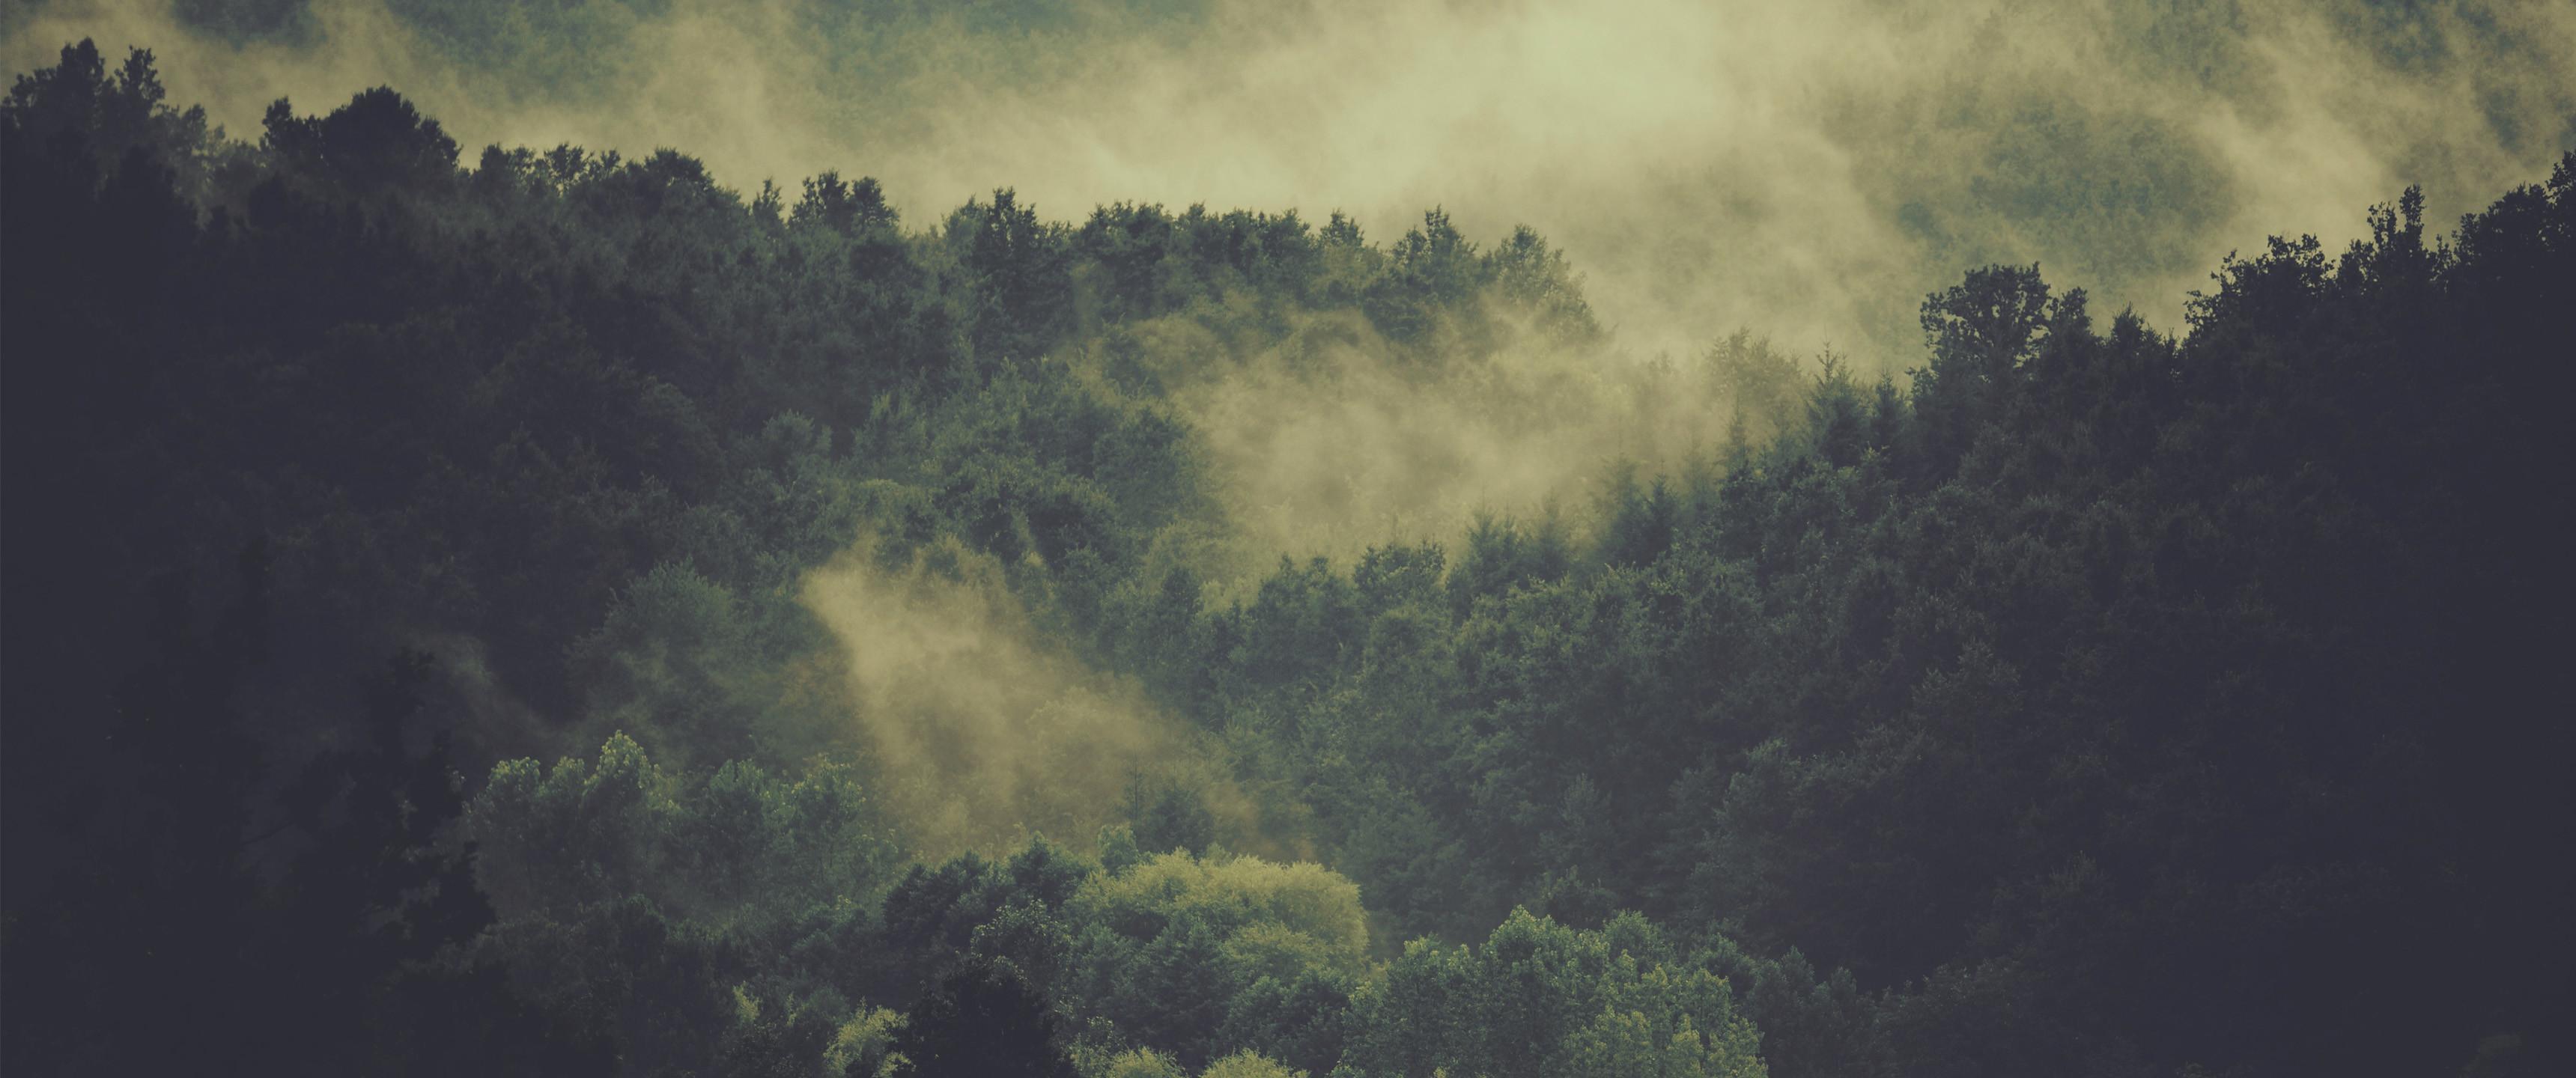 A forest of trees with misty clouds - 3440x1440